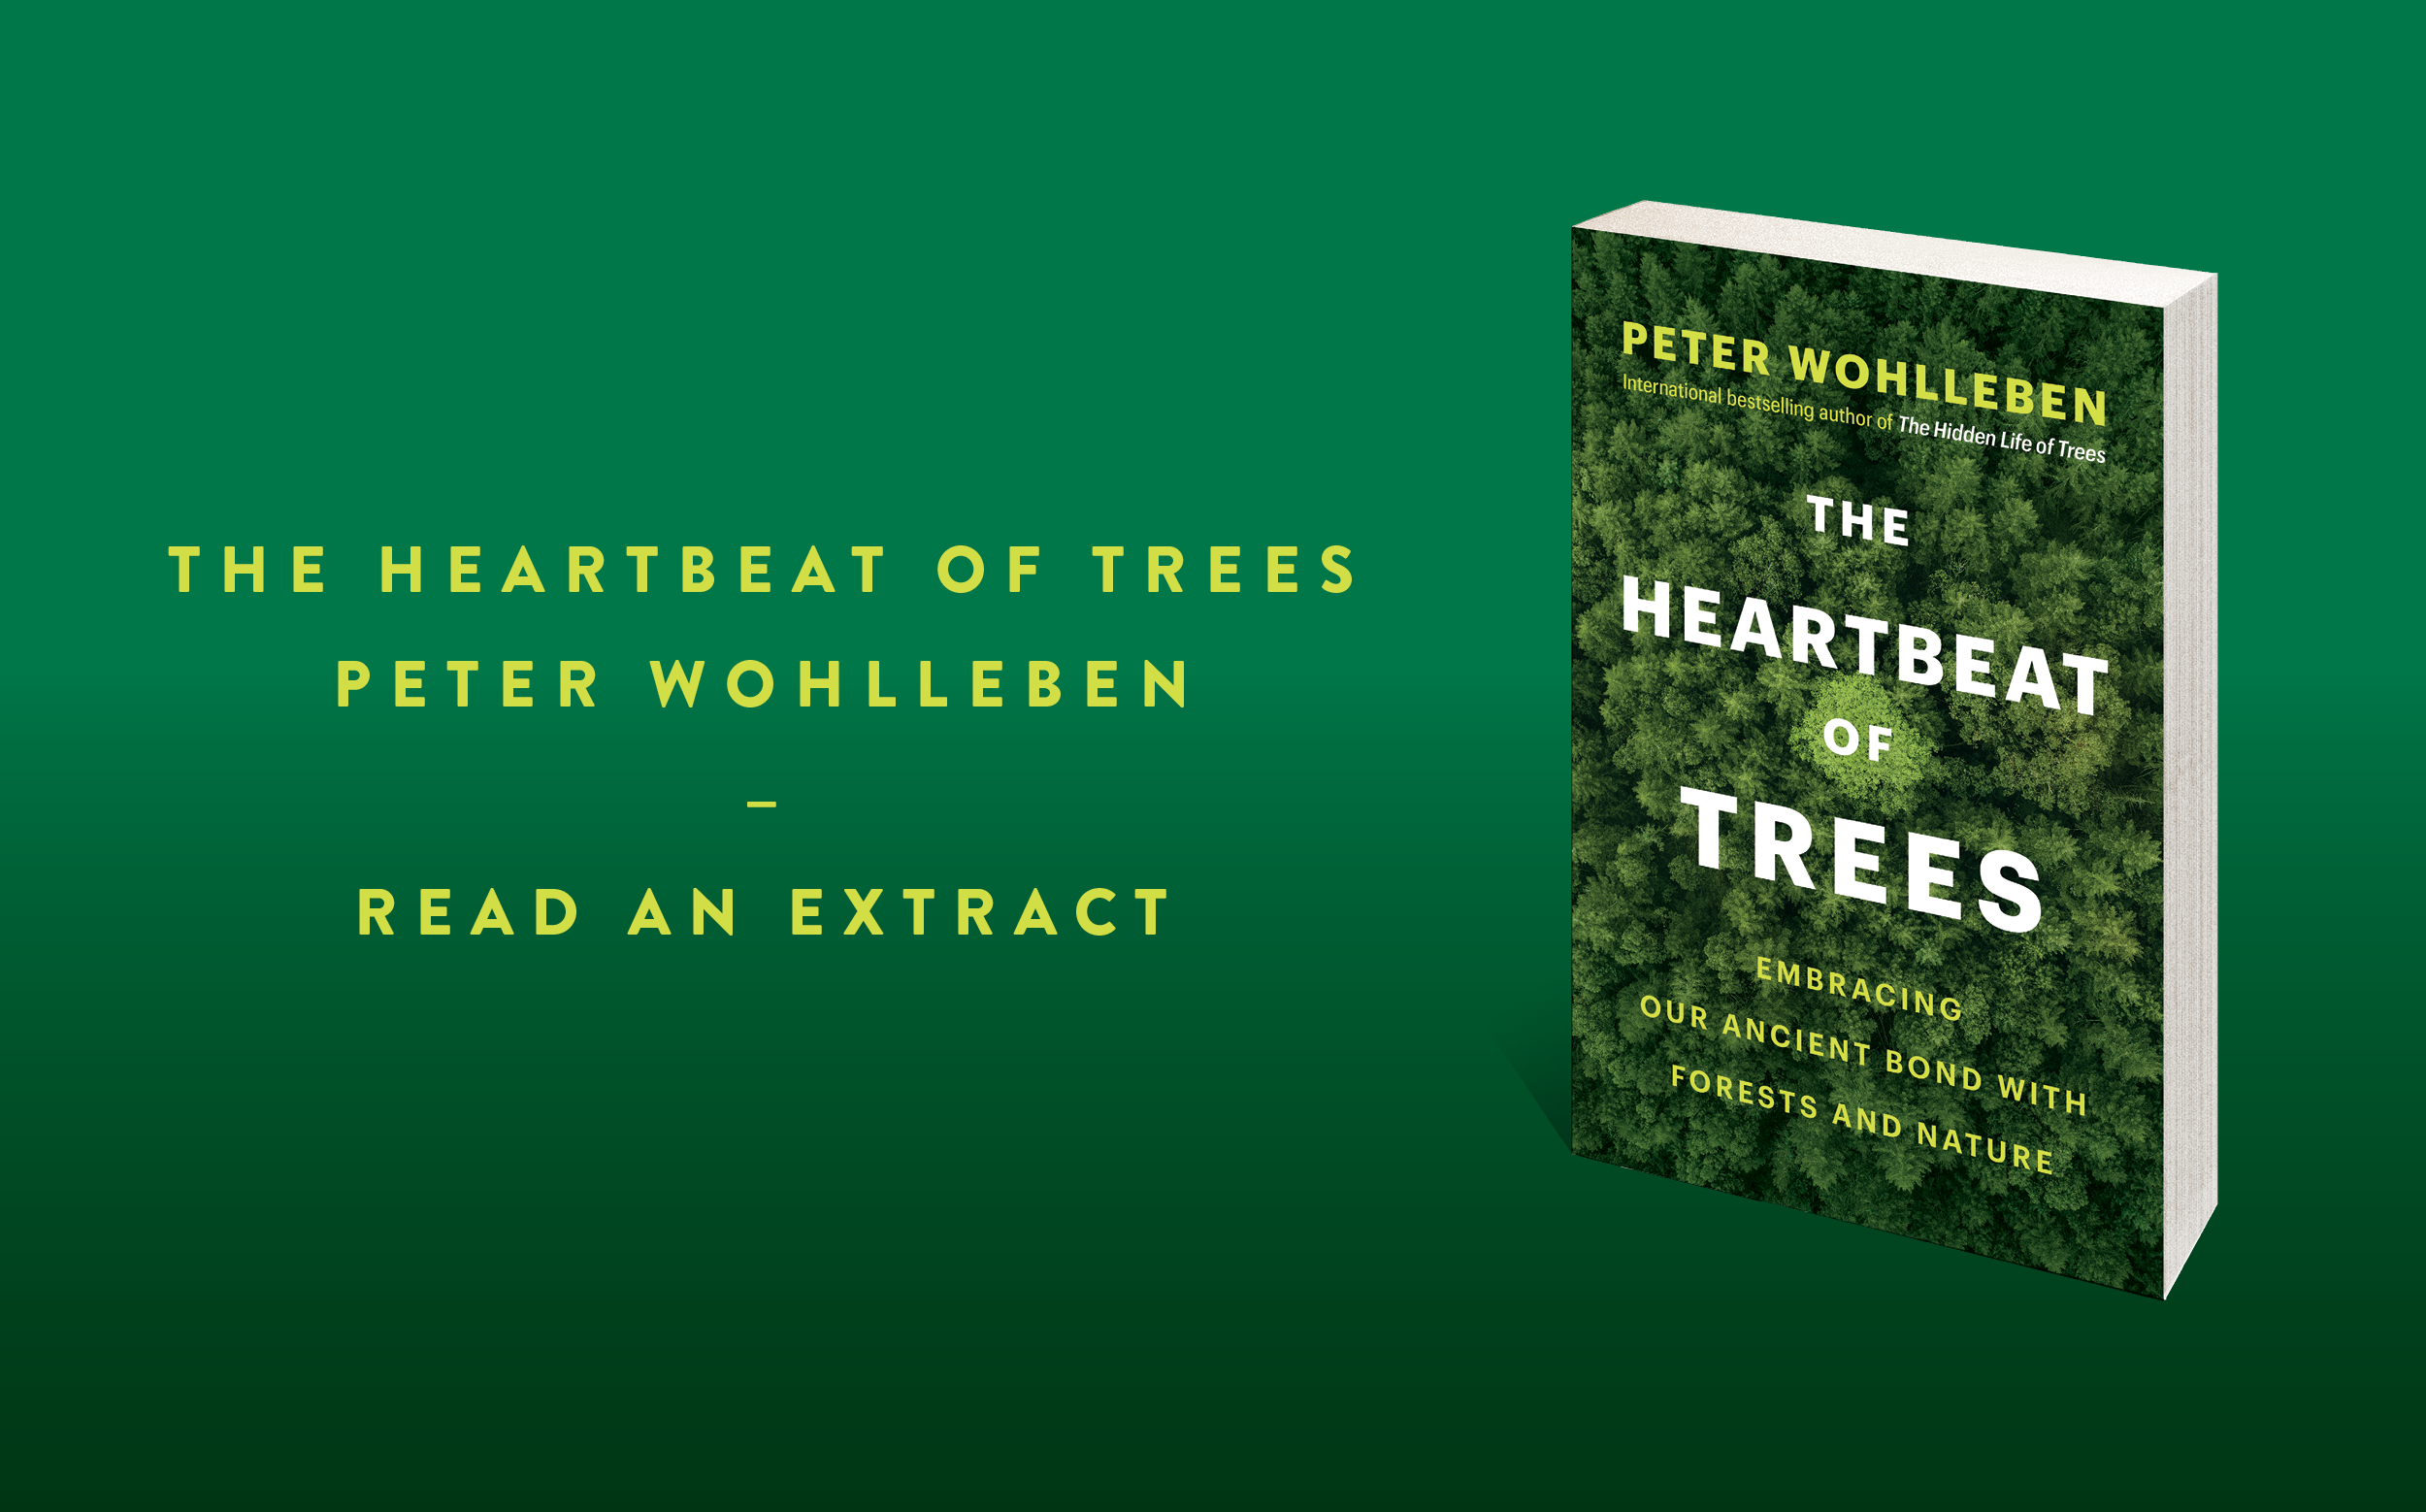 Read an extract: The Heartbeat of Trees